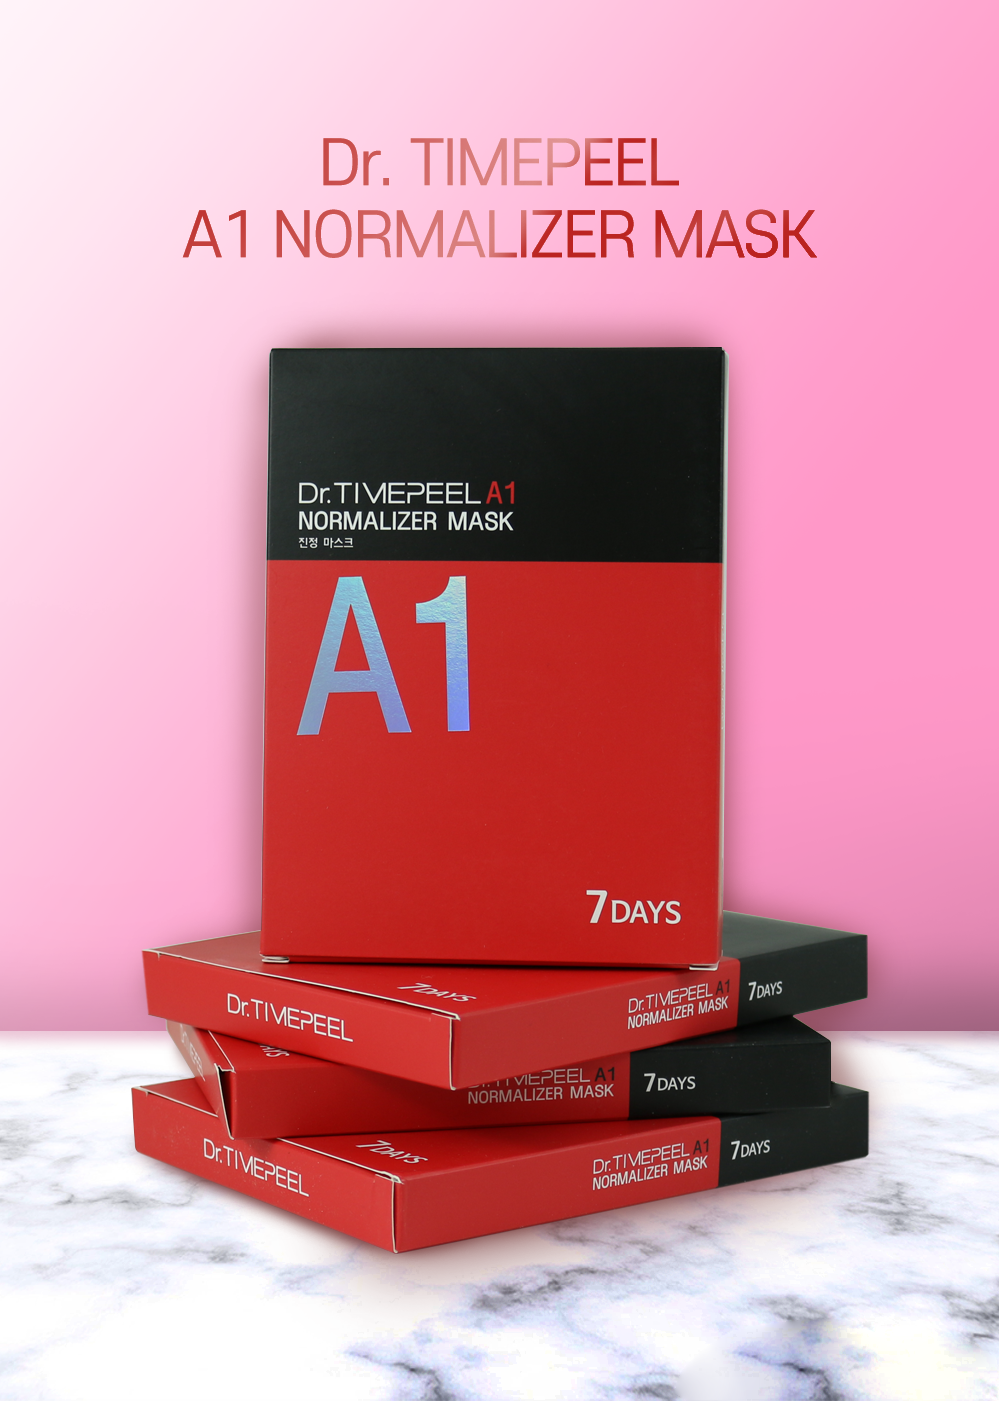 Dr. Timepeel A1 Normalizer Mask